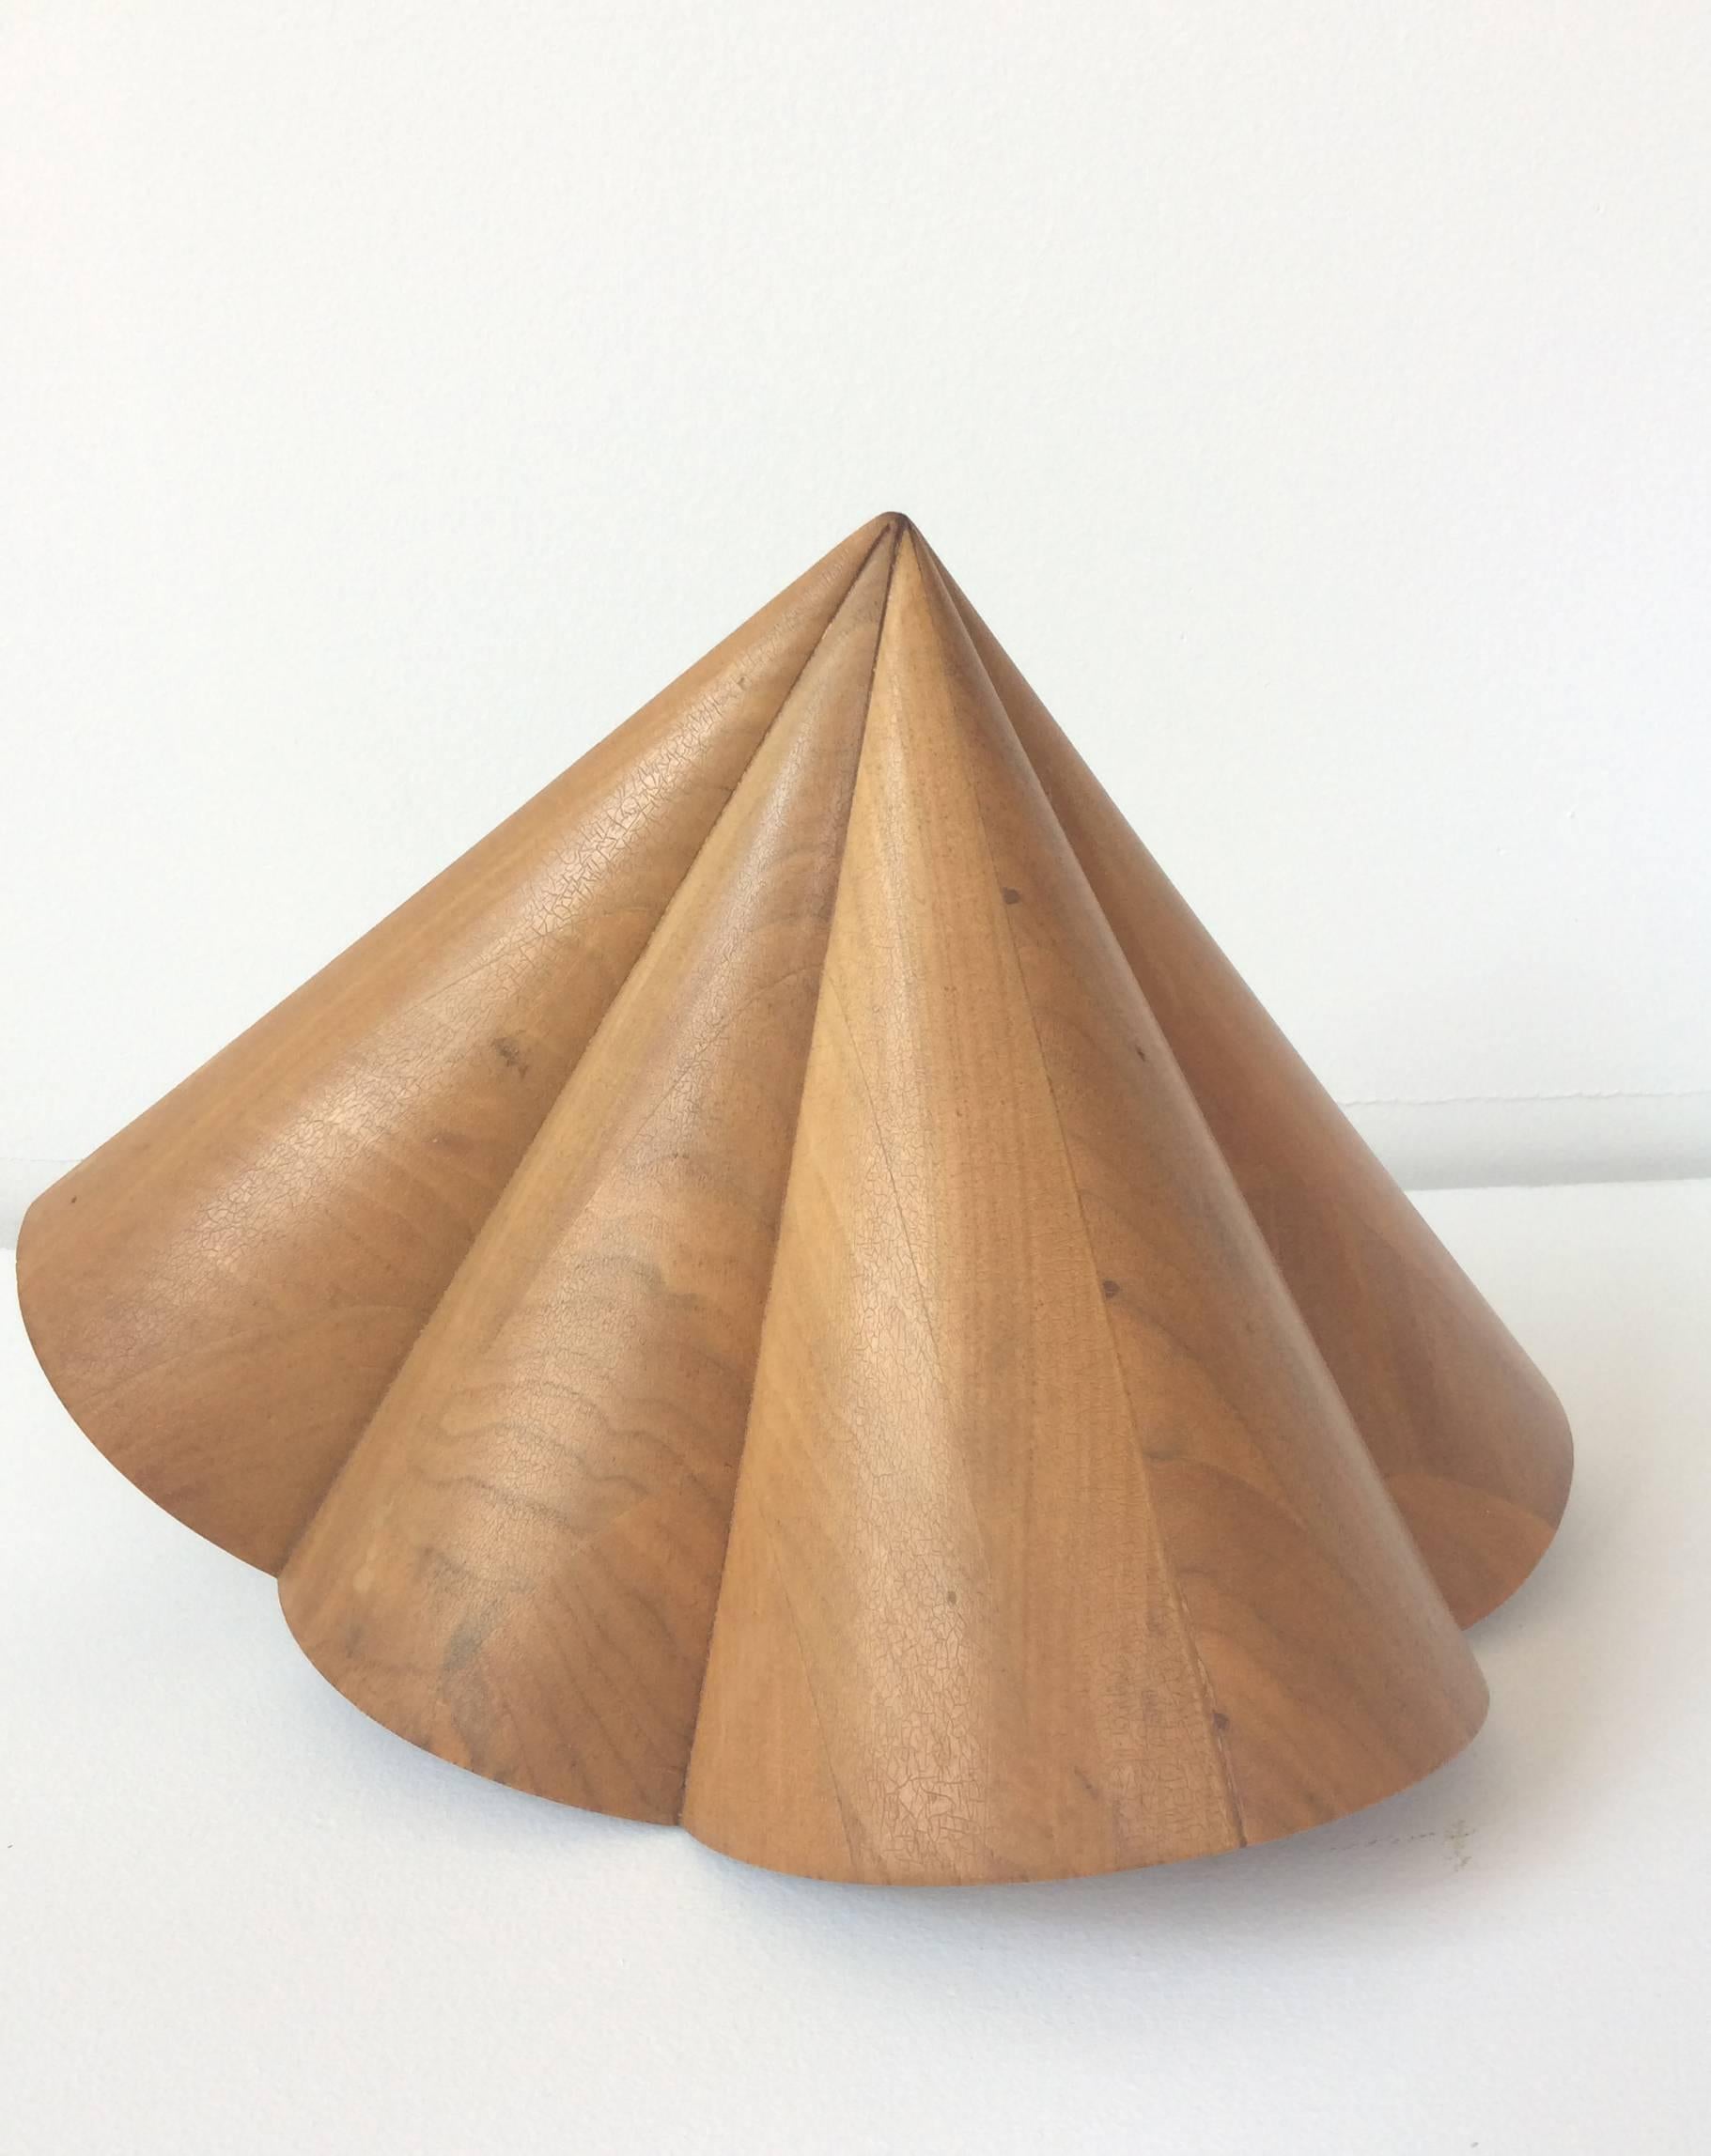 Leon Smith Abstract Sculpture - Fanfare (Small Abstract Wood Sculpture in Mid Century Modern Style)